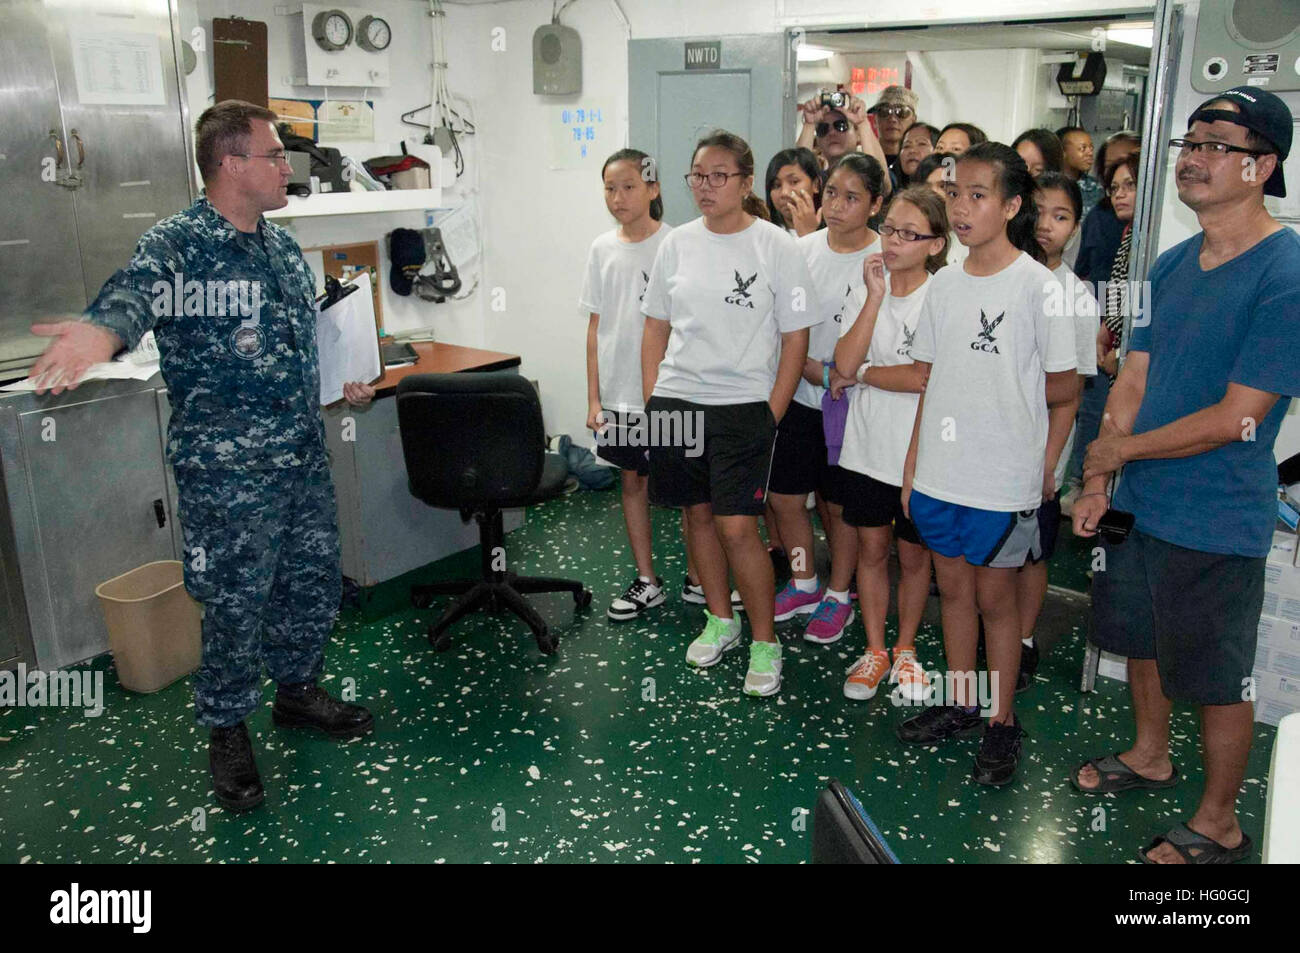 Hospital Corpsman 1st Class Clayton Smith explains the capabilities of the medical ward to students from Grace Christian Academy during a tour of the submarine tender USS Frank Cable (AS 40). Frank Cable conducts maintenance and support of submarine and surface vessels deployed in the U.S. 7th Fleet area of responsibility. (U.S. Navy photo by Mass Communication Specialist 1st Class Jason C. Swink) USS Frank Cable tour 130114-N-CB621-219 Stock Photo